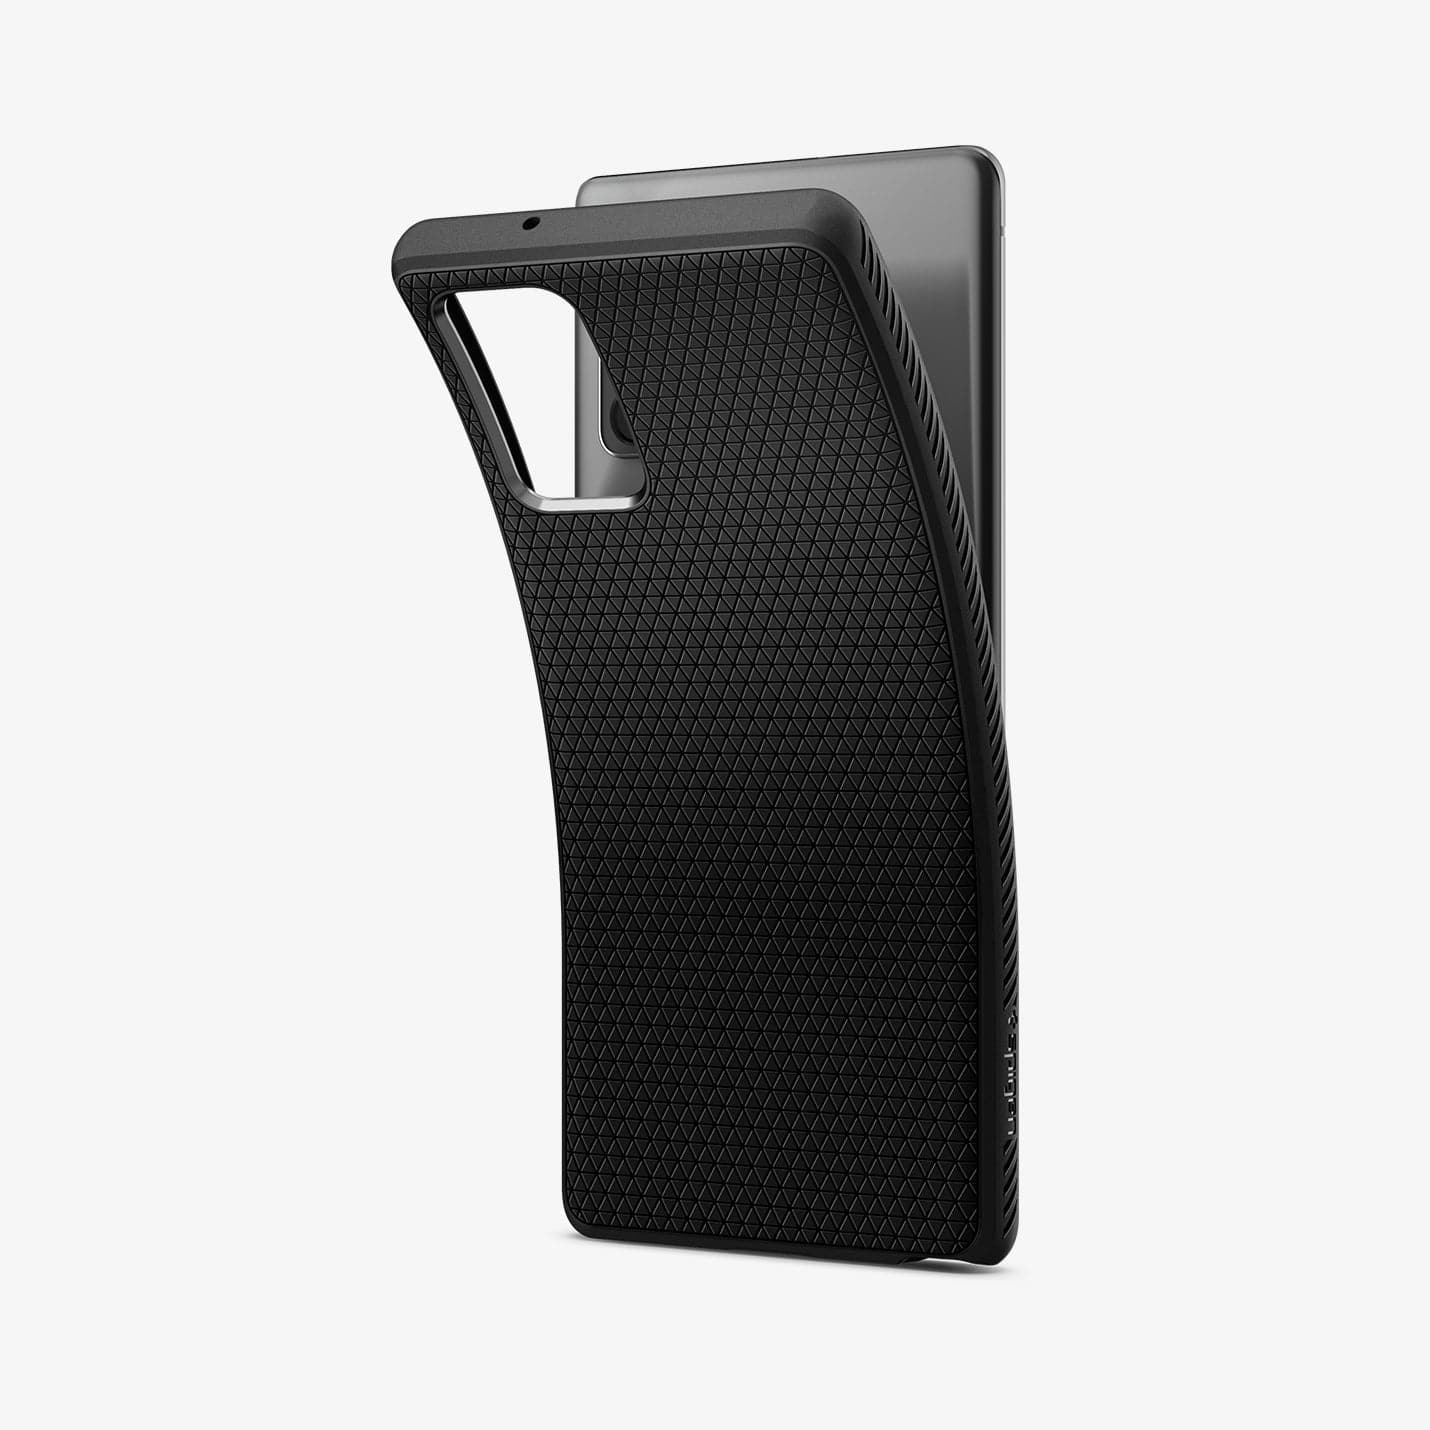 ACS01418 - Galaxy Note 20 Liquid Air Case in matte black showing the back with case bending away from the device